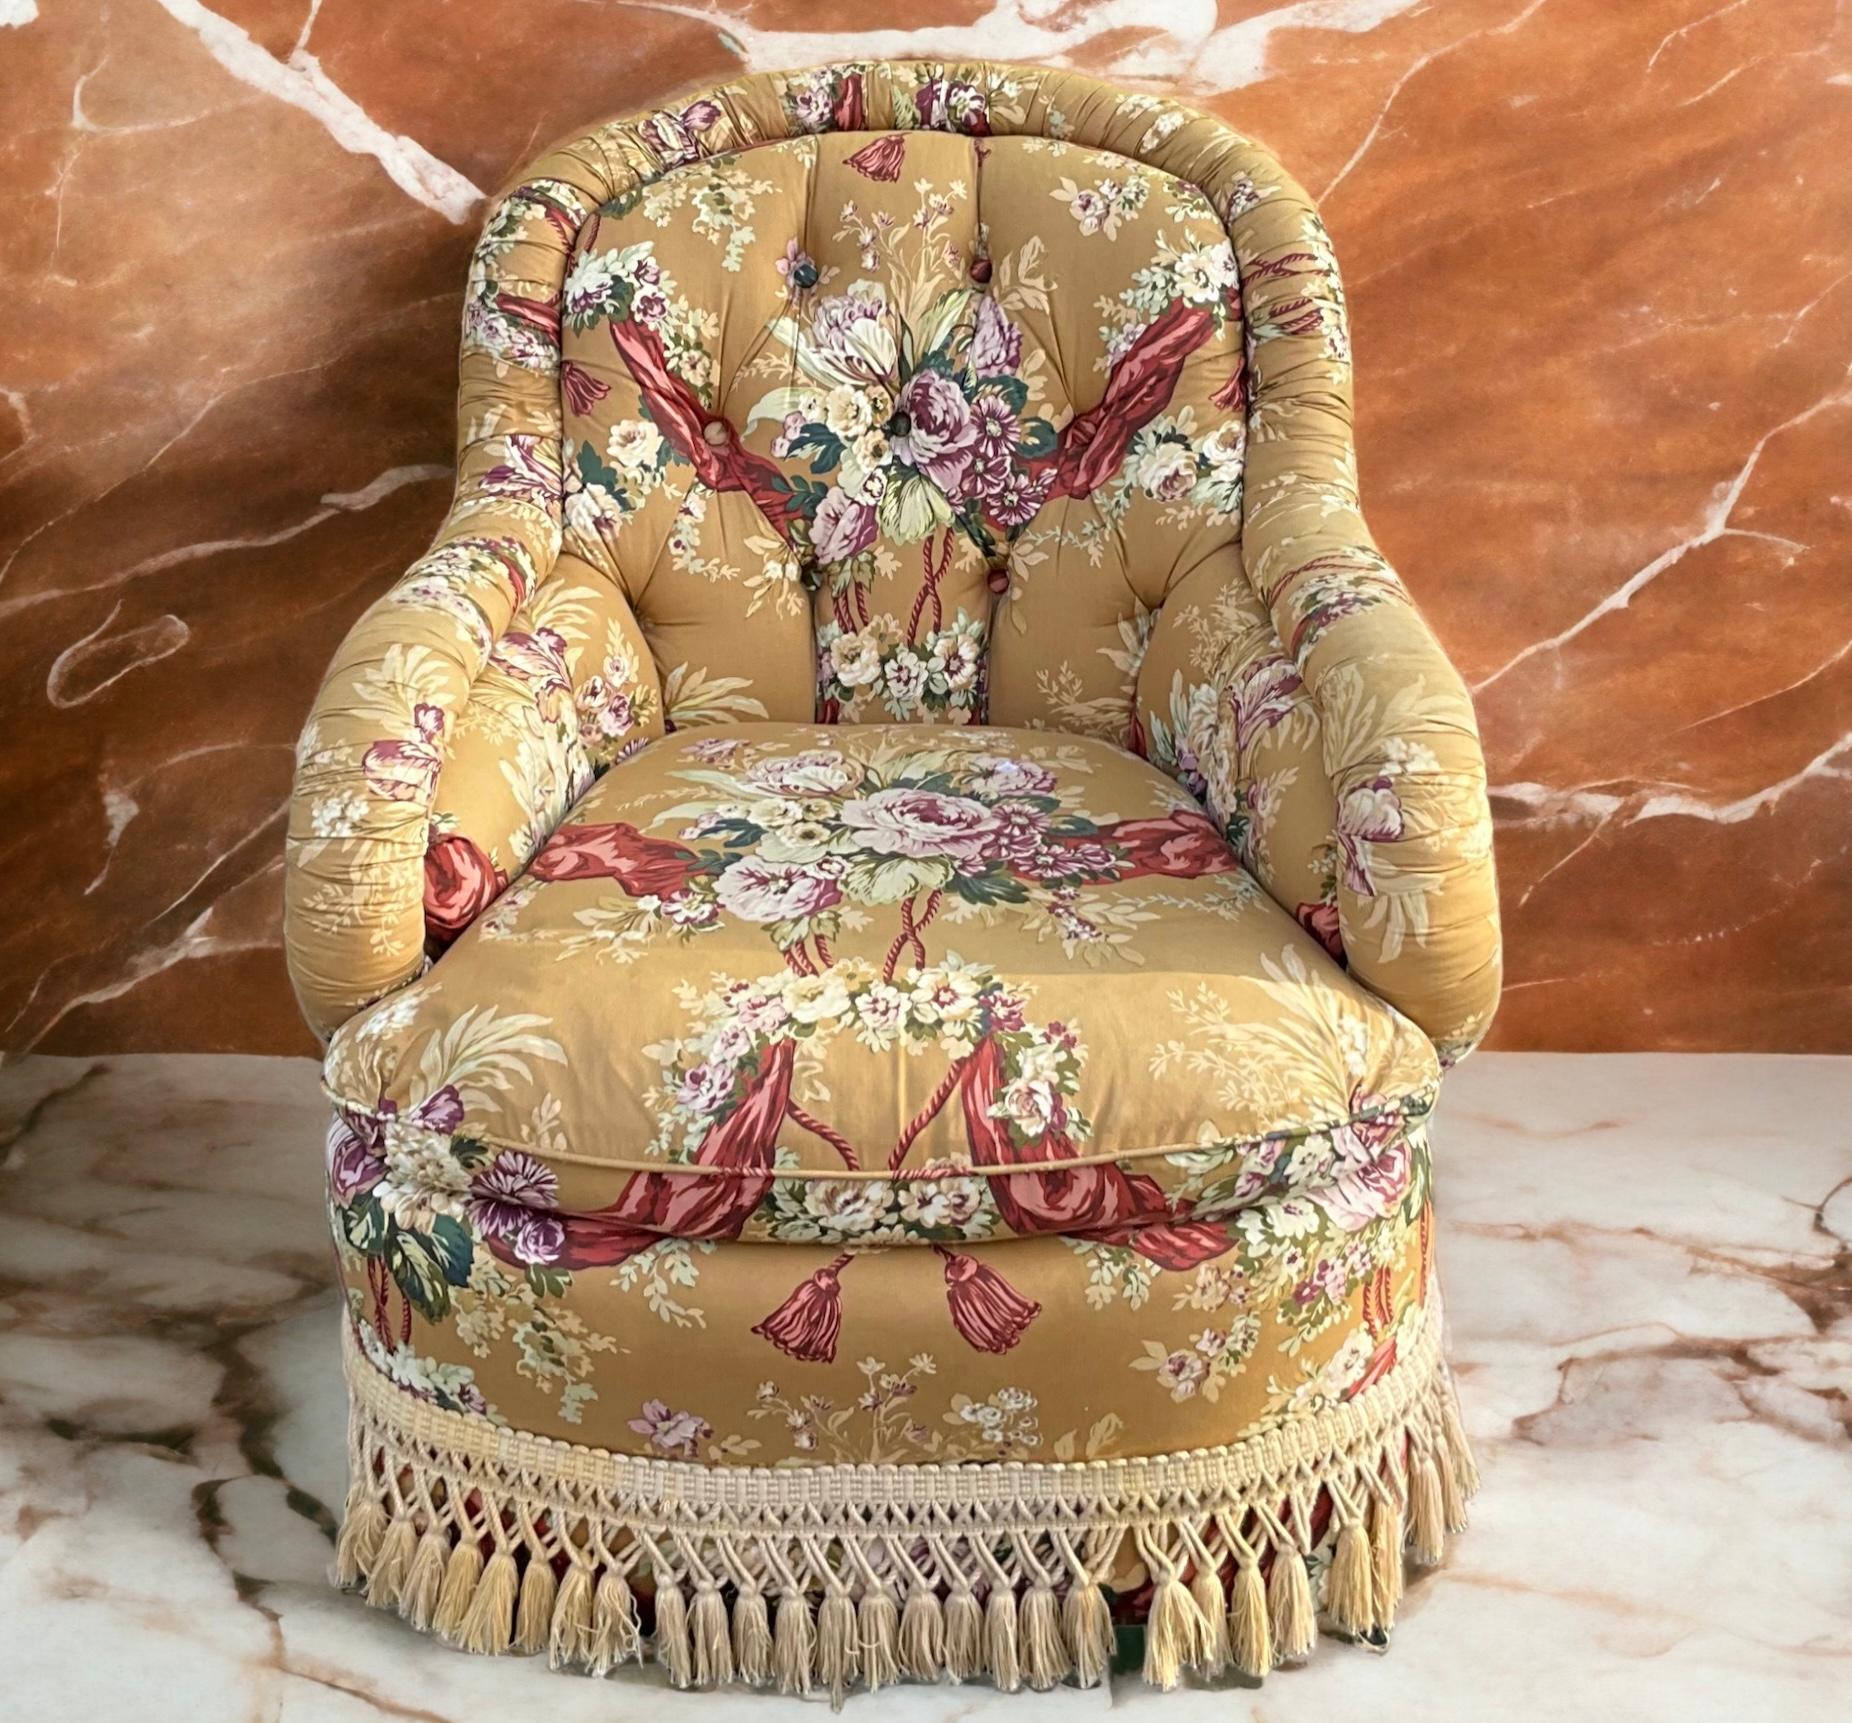 This is a lovely Baker Furniture club chair upholstered in a floral chintz. It is marked. There is some lite wear to the arms and fringe. 

My shipping is for the Continental US only and can run two to five weeks.